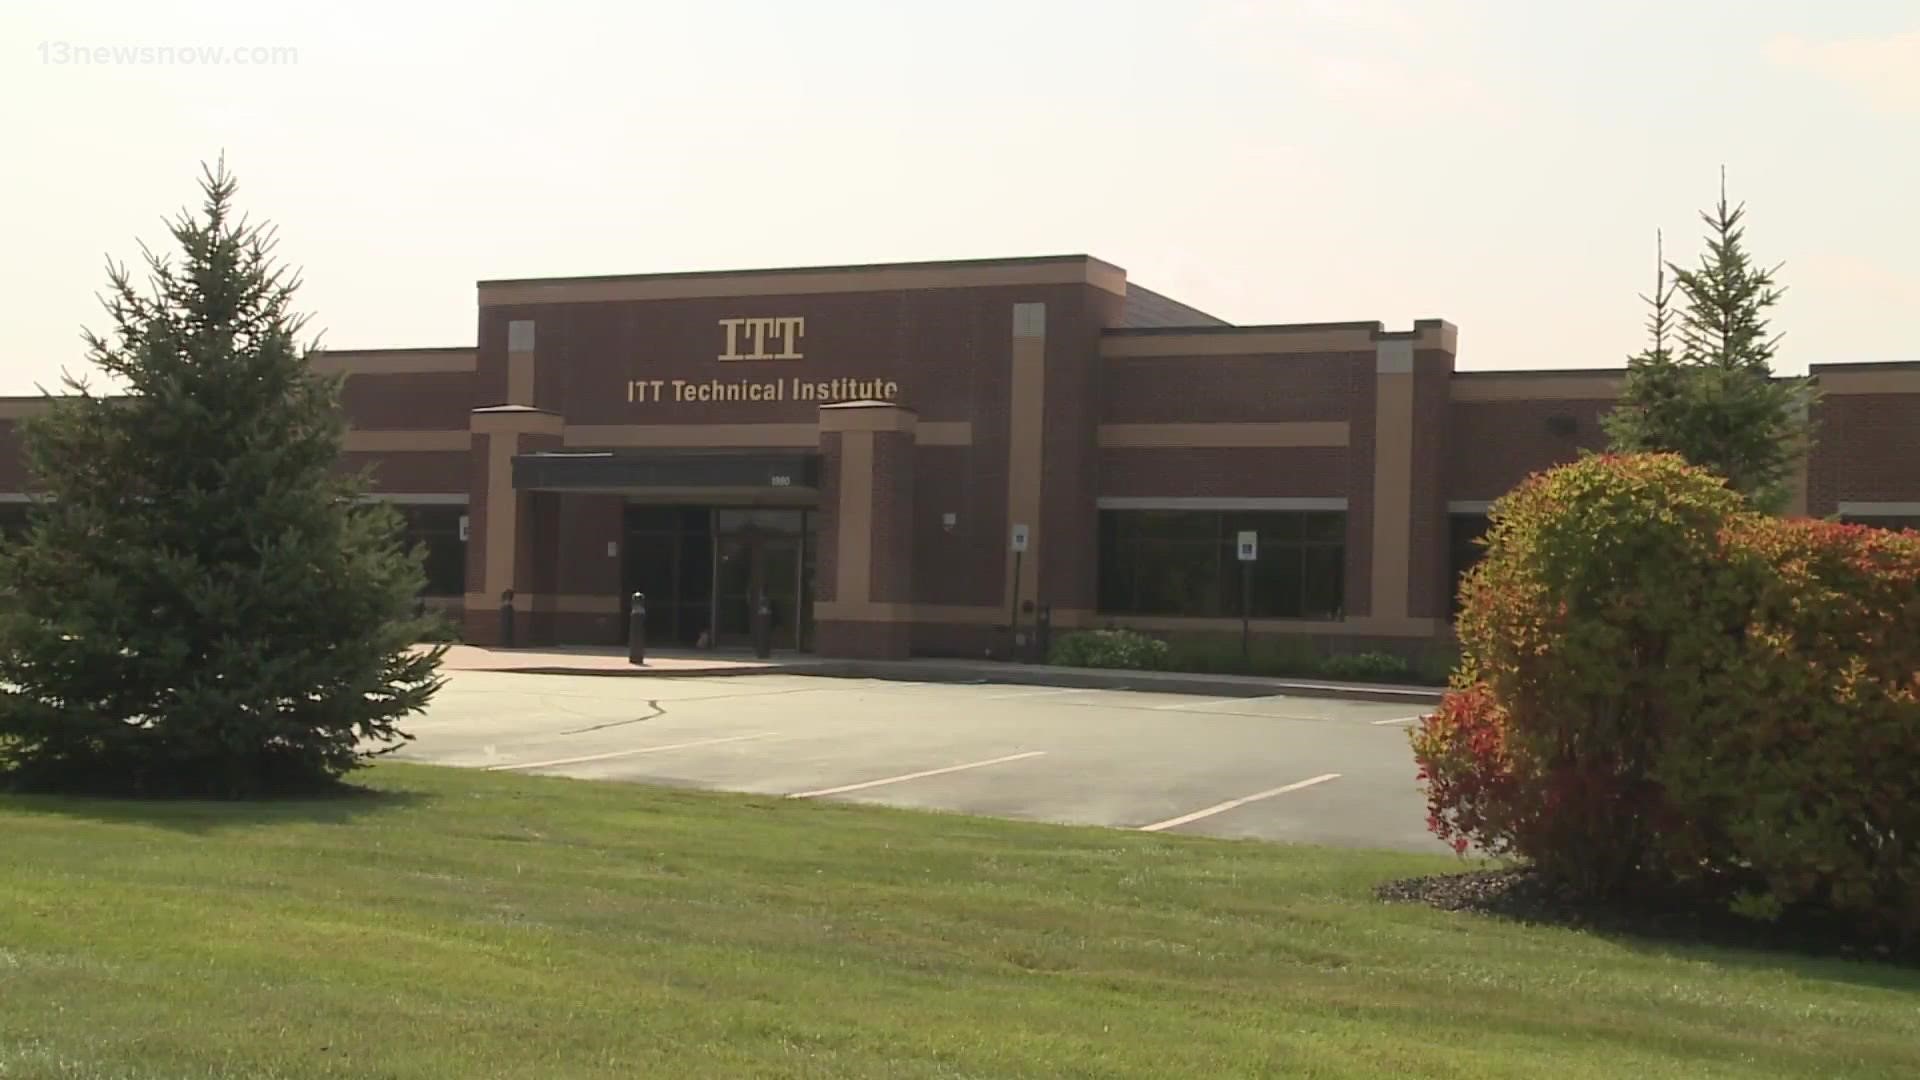 Nationwide, the U.S. Department of Education is canceling the federal student loans of more than 200,000 former ITT Tech students.